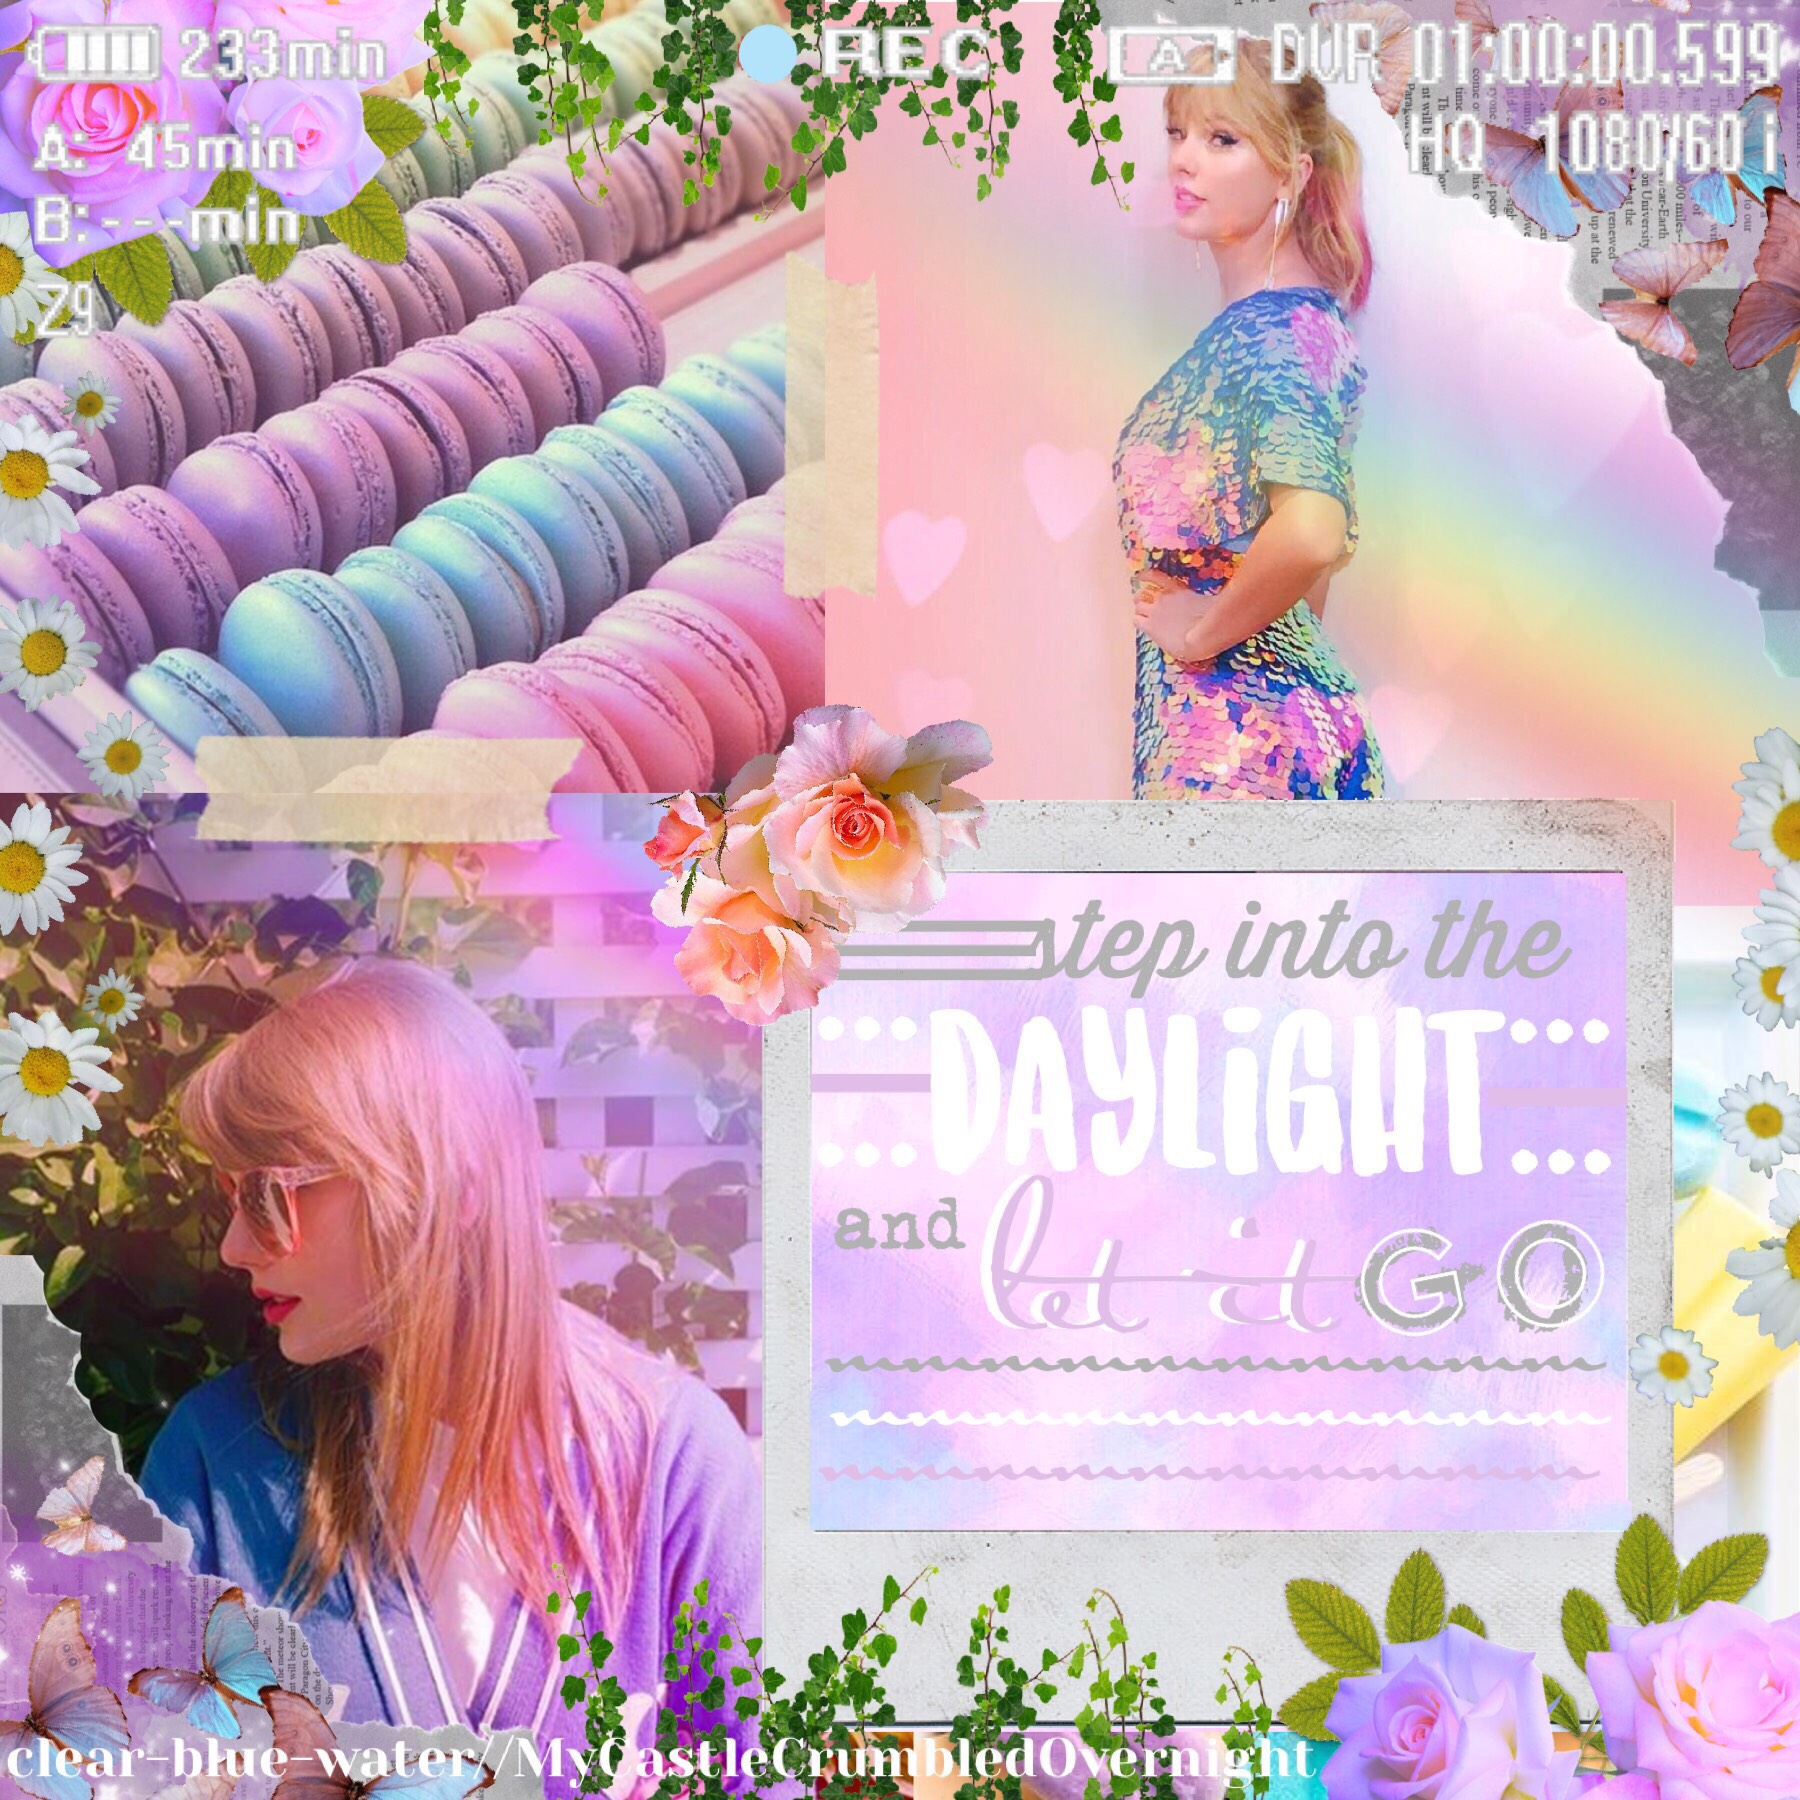 I’m so excited for ts7   Tap 💕
Collab with the fabulous clear-blue-water 🌊
QOTD: pastel or neutral colors?
AOTD: pastel 💖